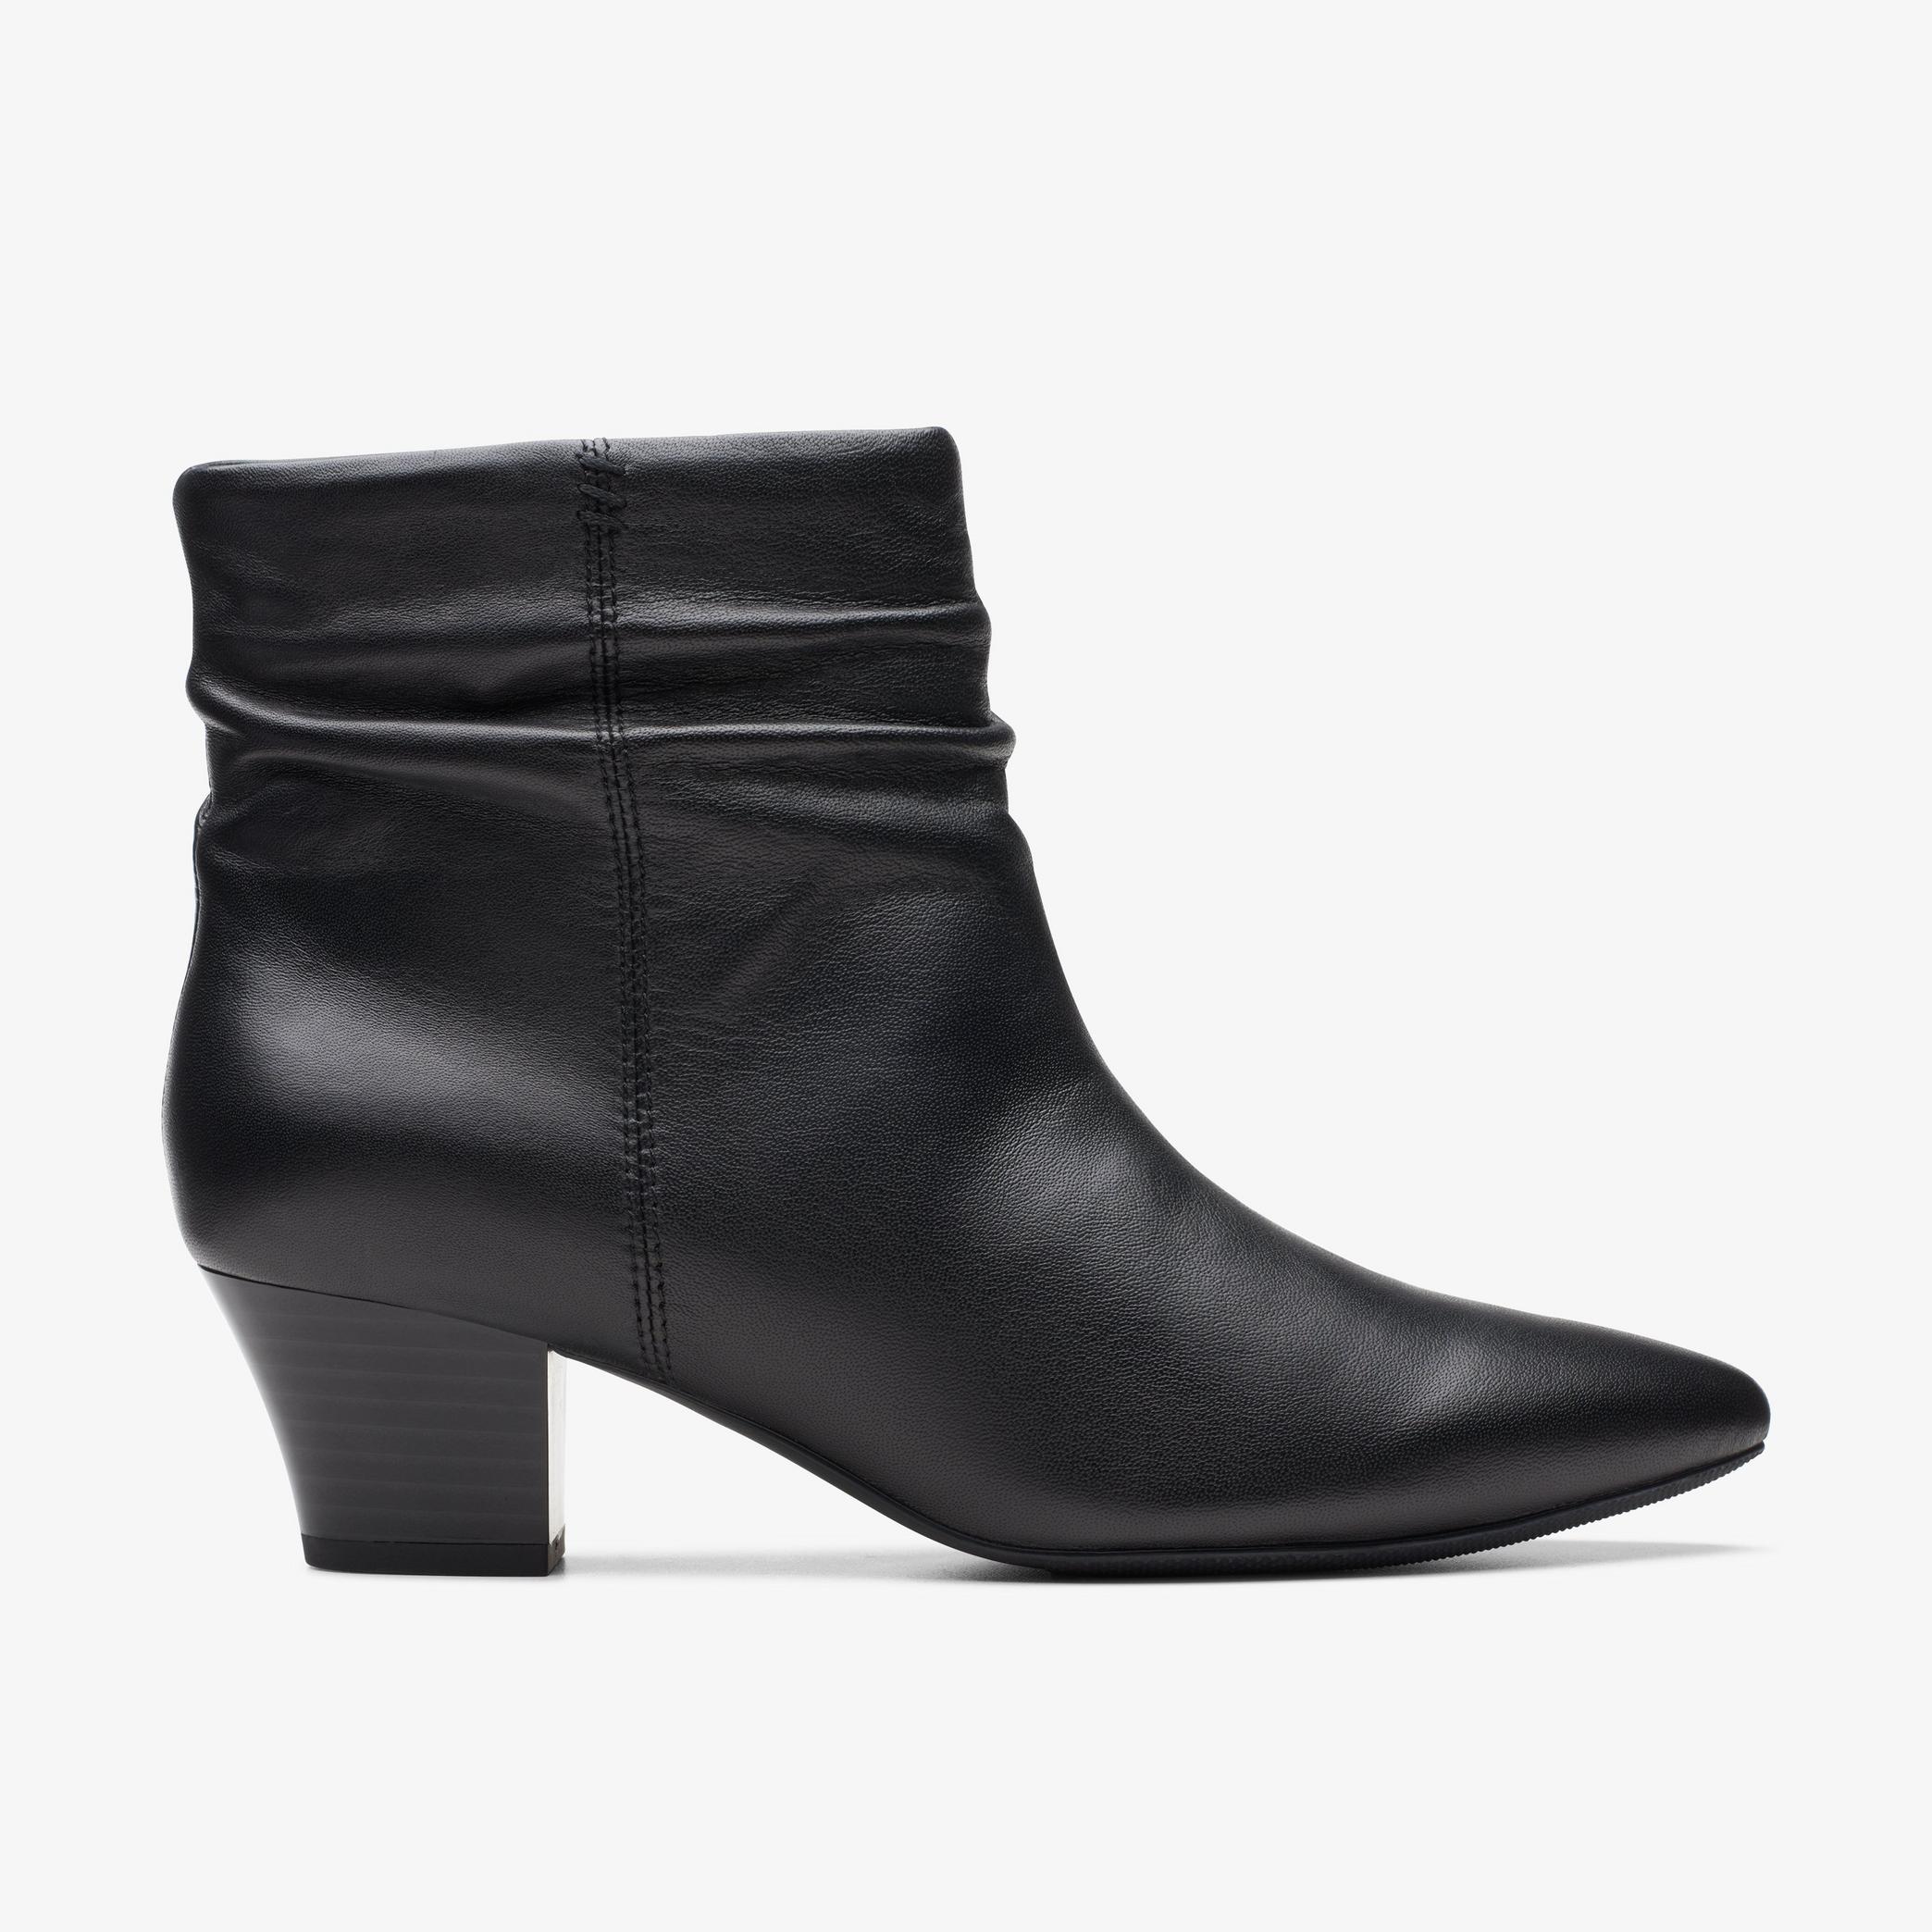 Teresa Skip Black Leather Ankle Boots, view 1 of 6